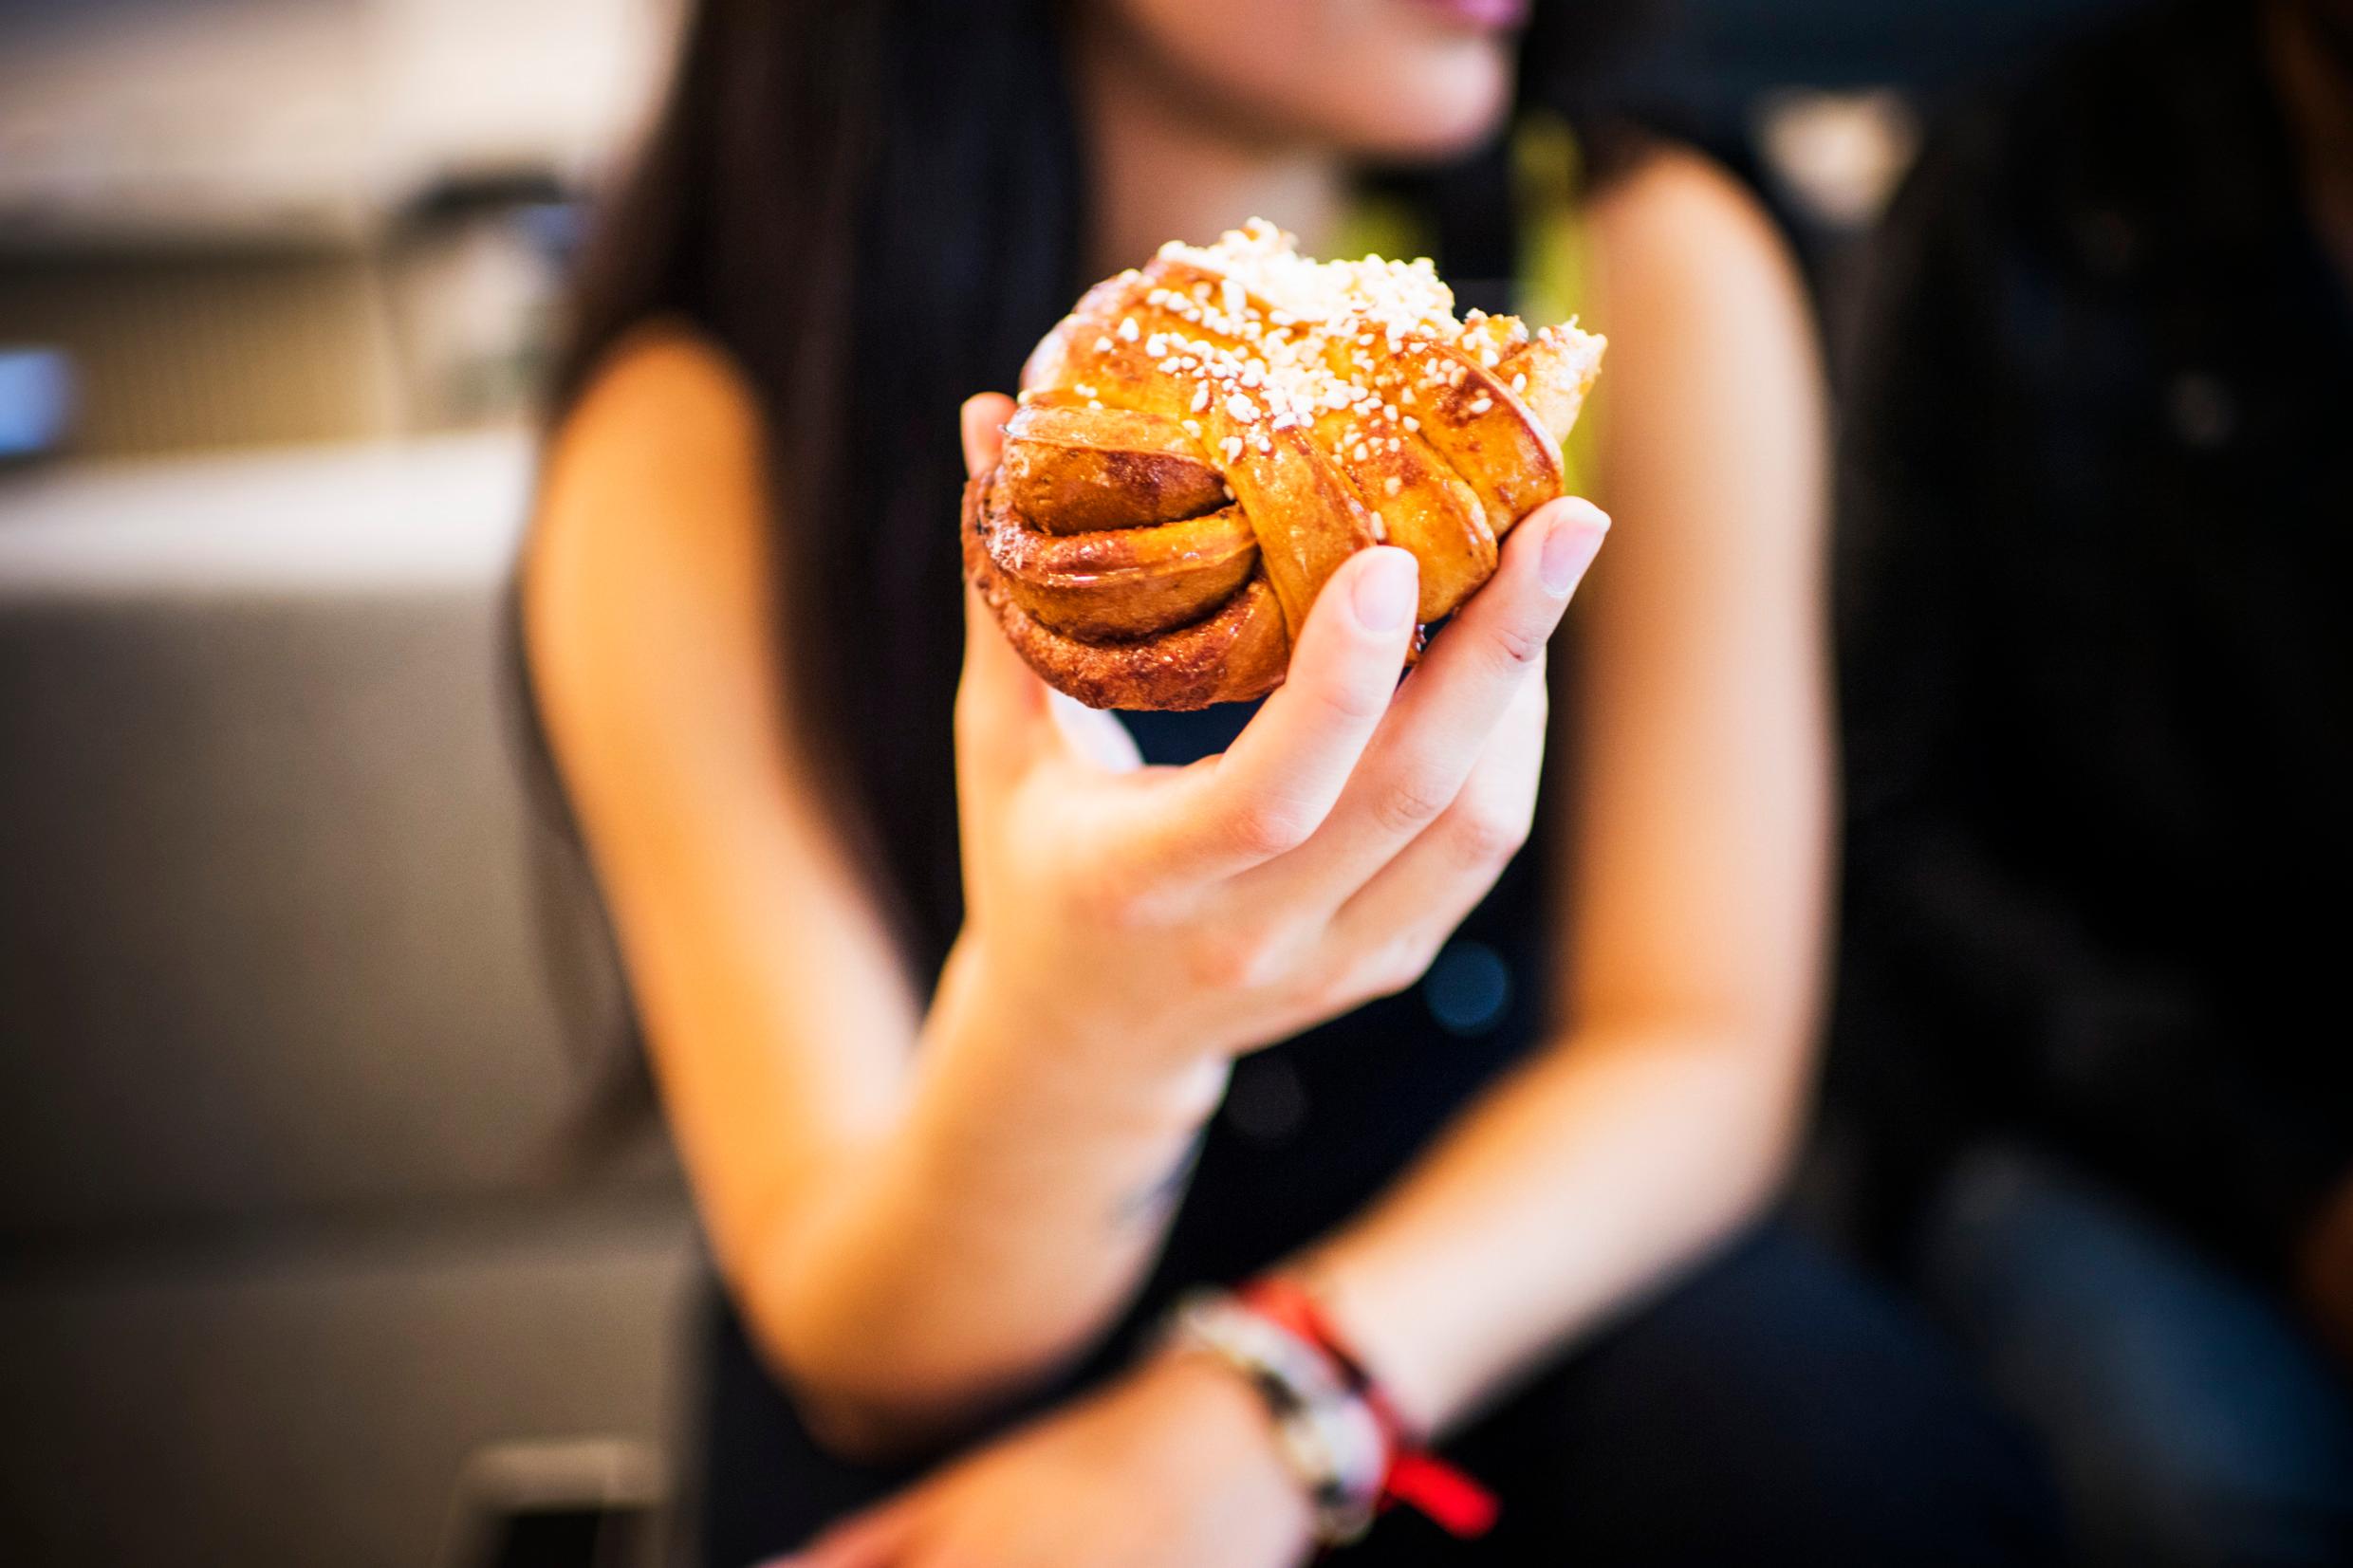 A person holding a cinnamon bun in an outstretched arm.